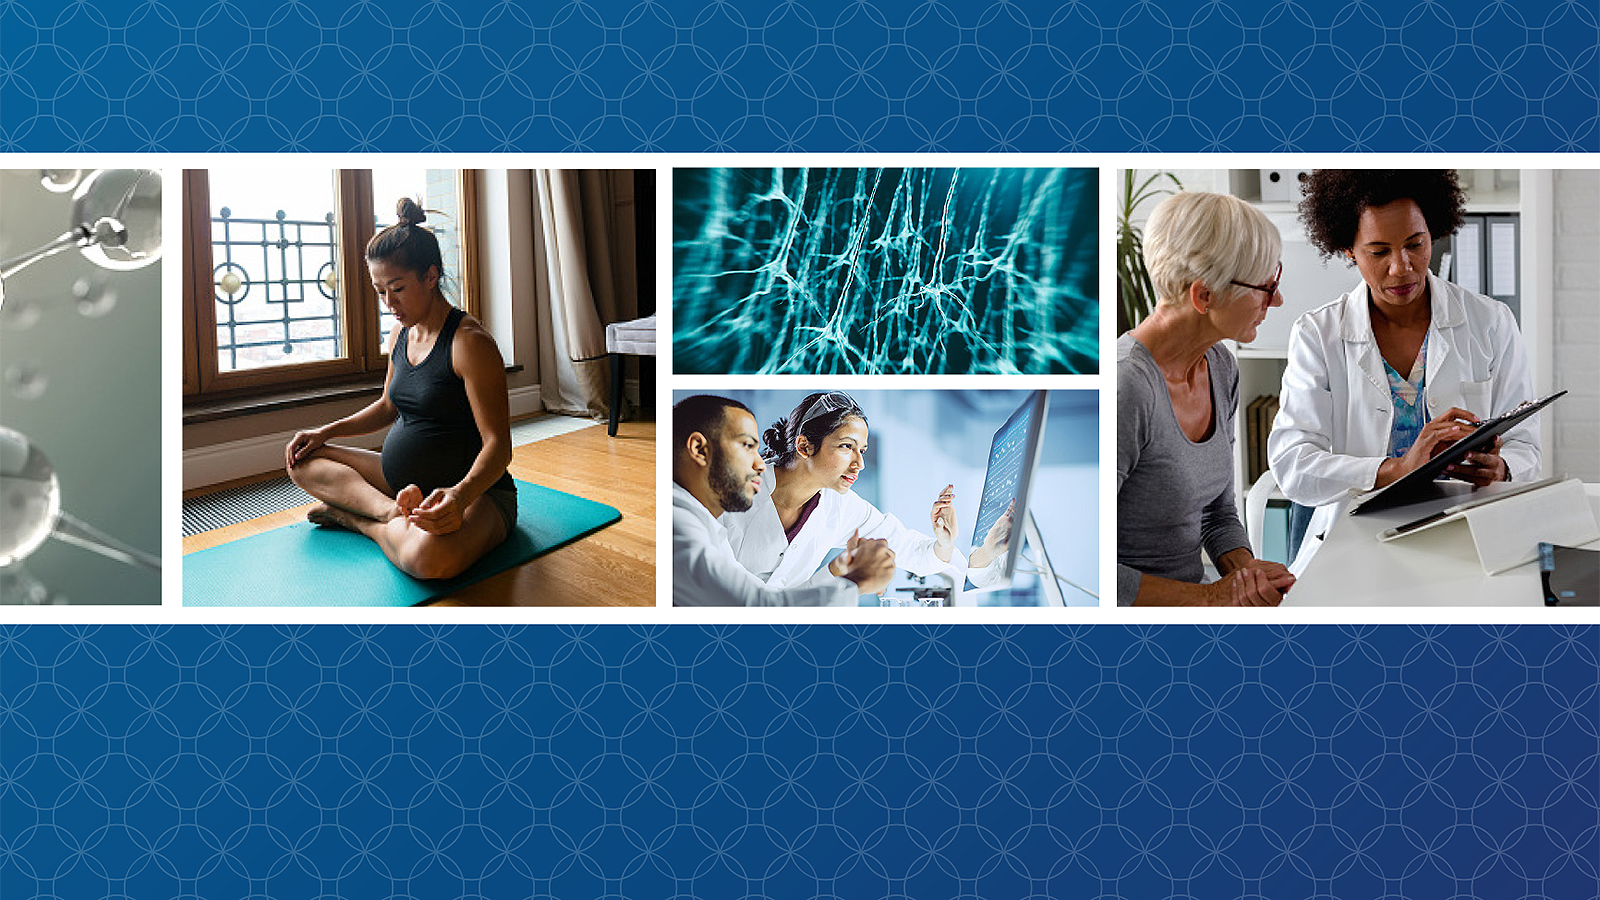  A collage of photos showing a 3D rendering of a molecule, a pregnant woman doing yoga, a 3D rendering of a Neuron cell network, two scientists looking at a computer monitor, and an elderly female patient with a female doctor.